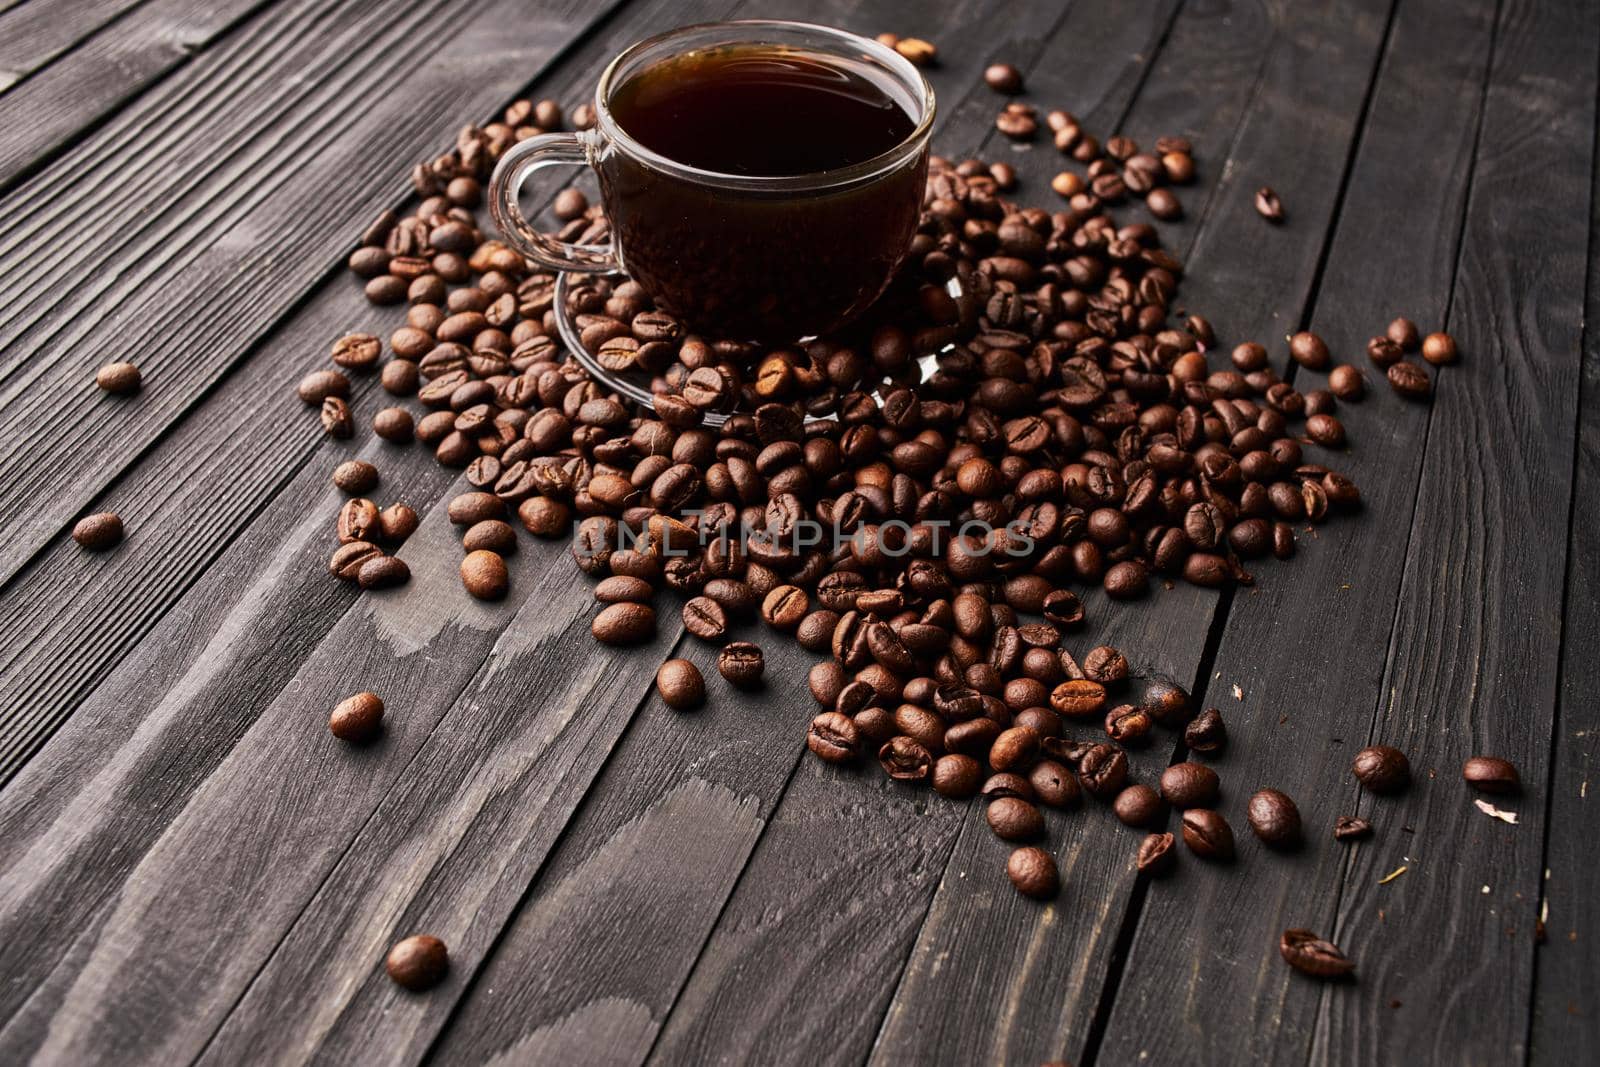 coffee beans brown mocha beans photograph of the object by Vichizh